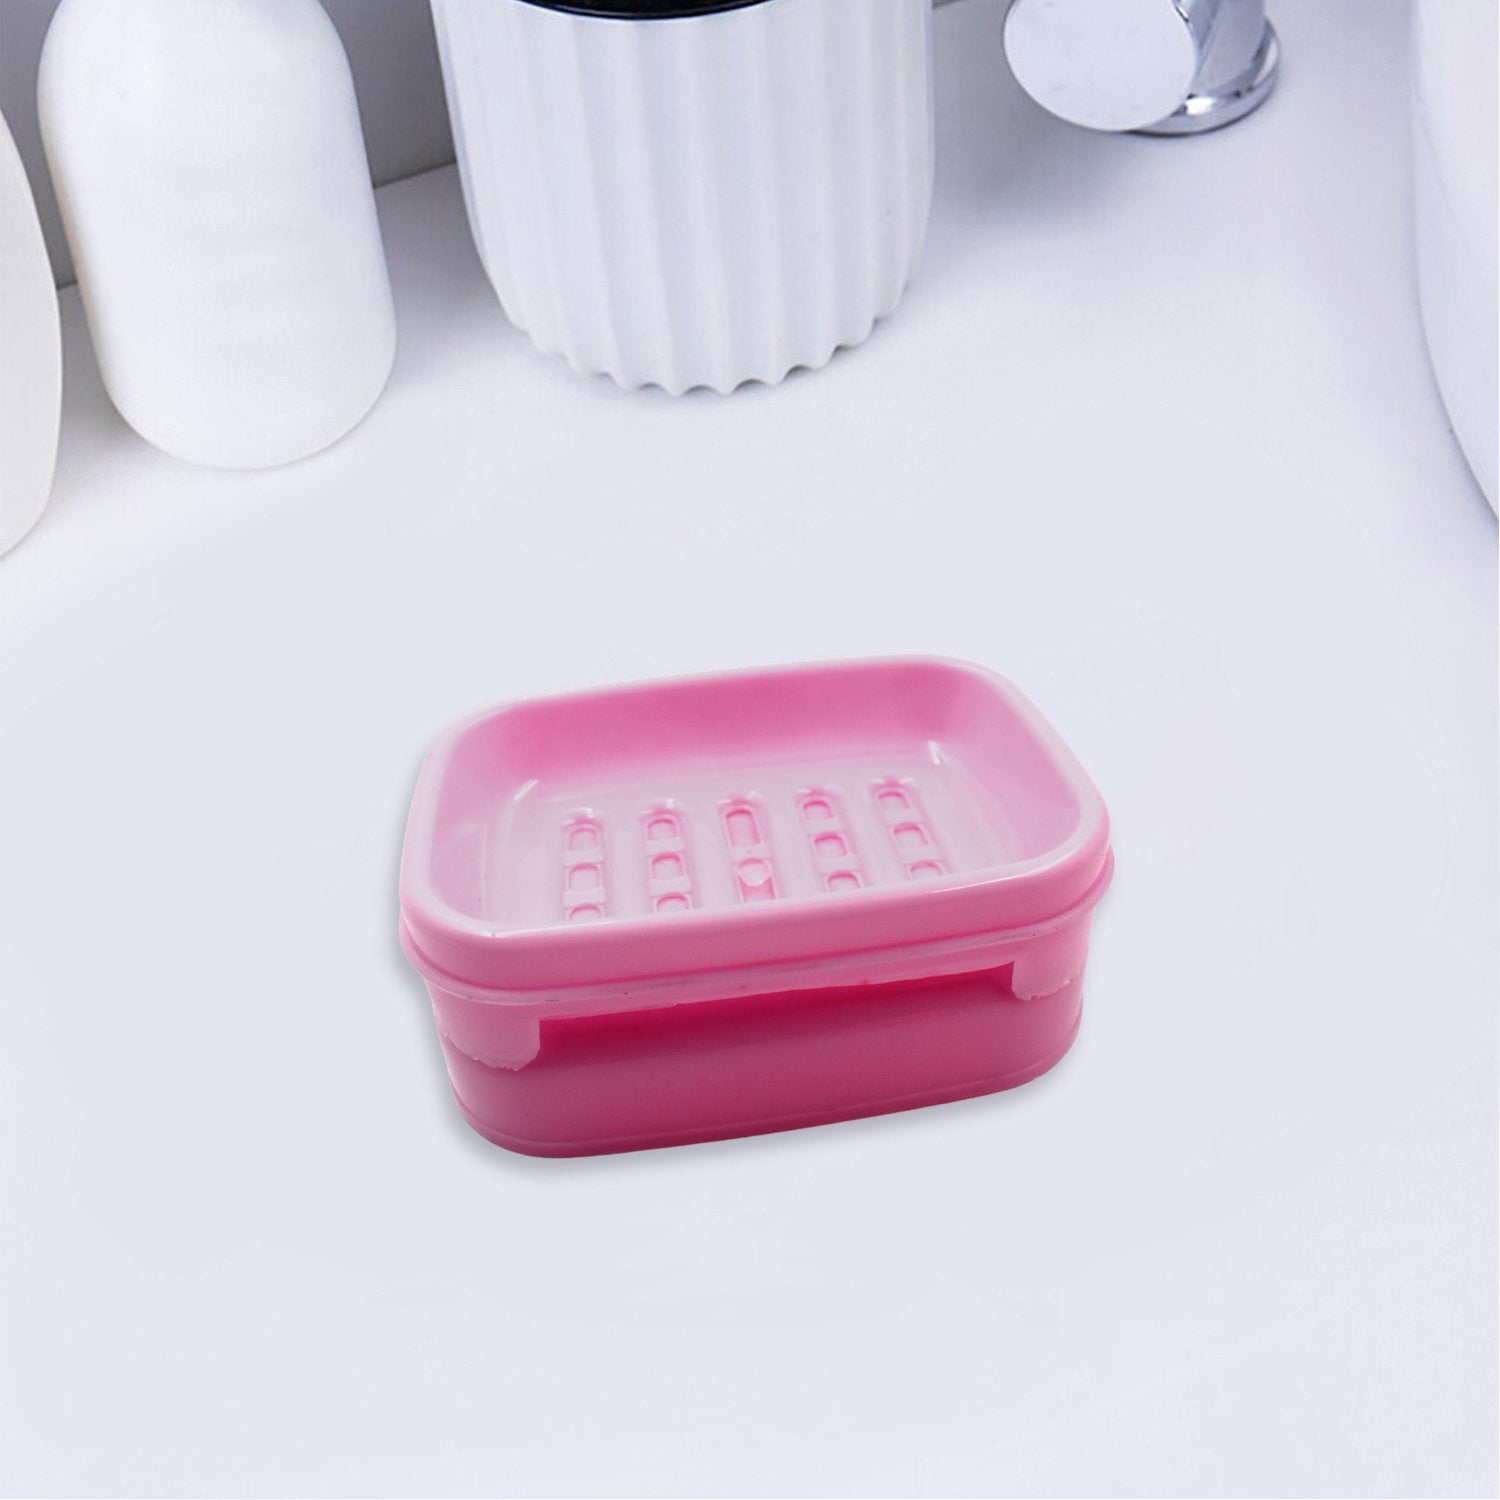 4723 Plastic Soap Case Cover for Bathroom use Pack of 12Pcs freeshipping - DeoDap